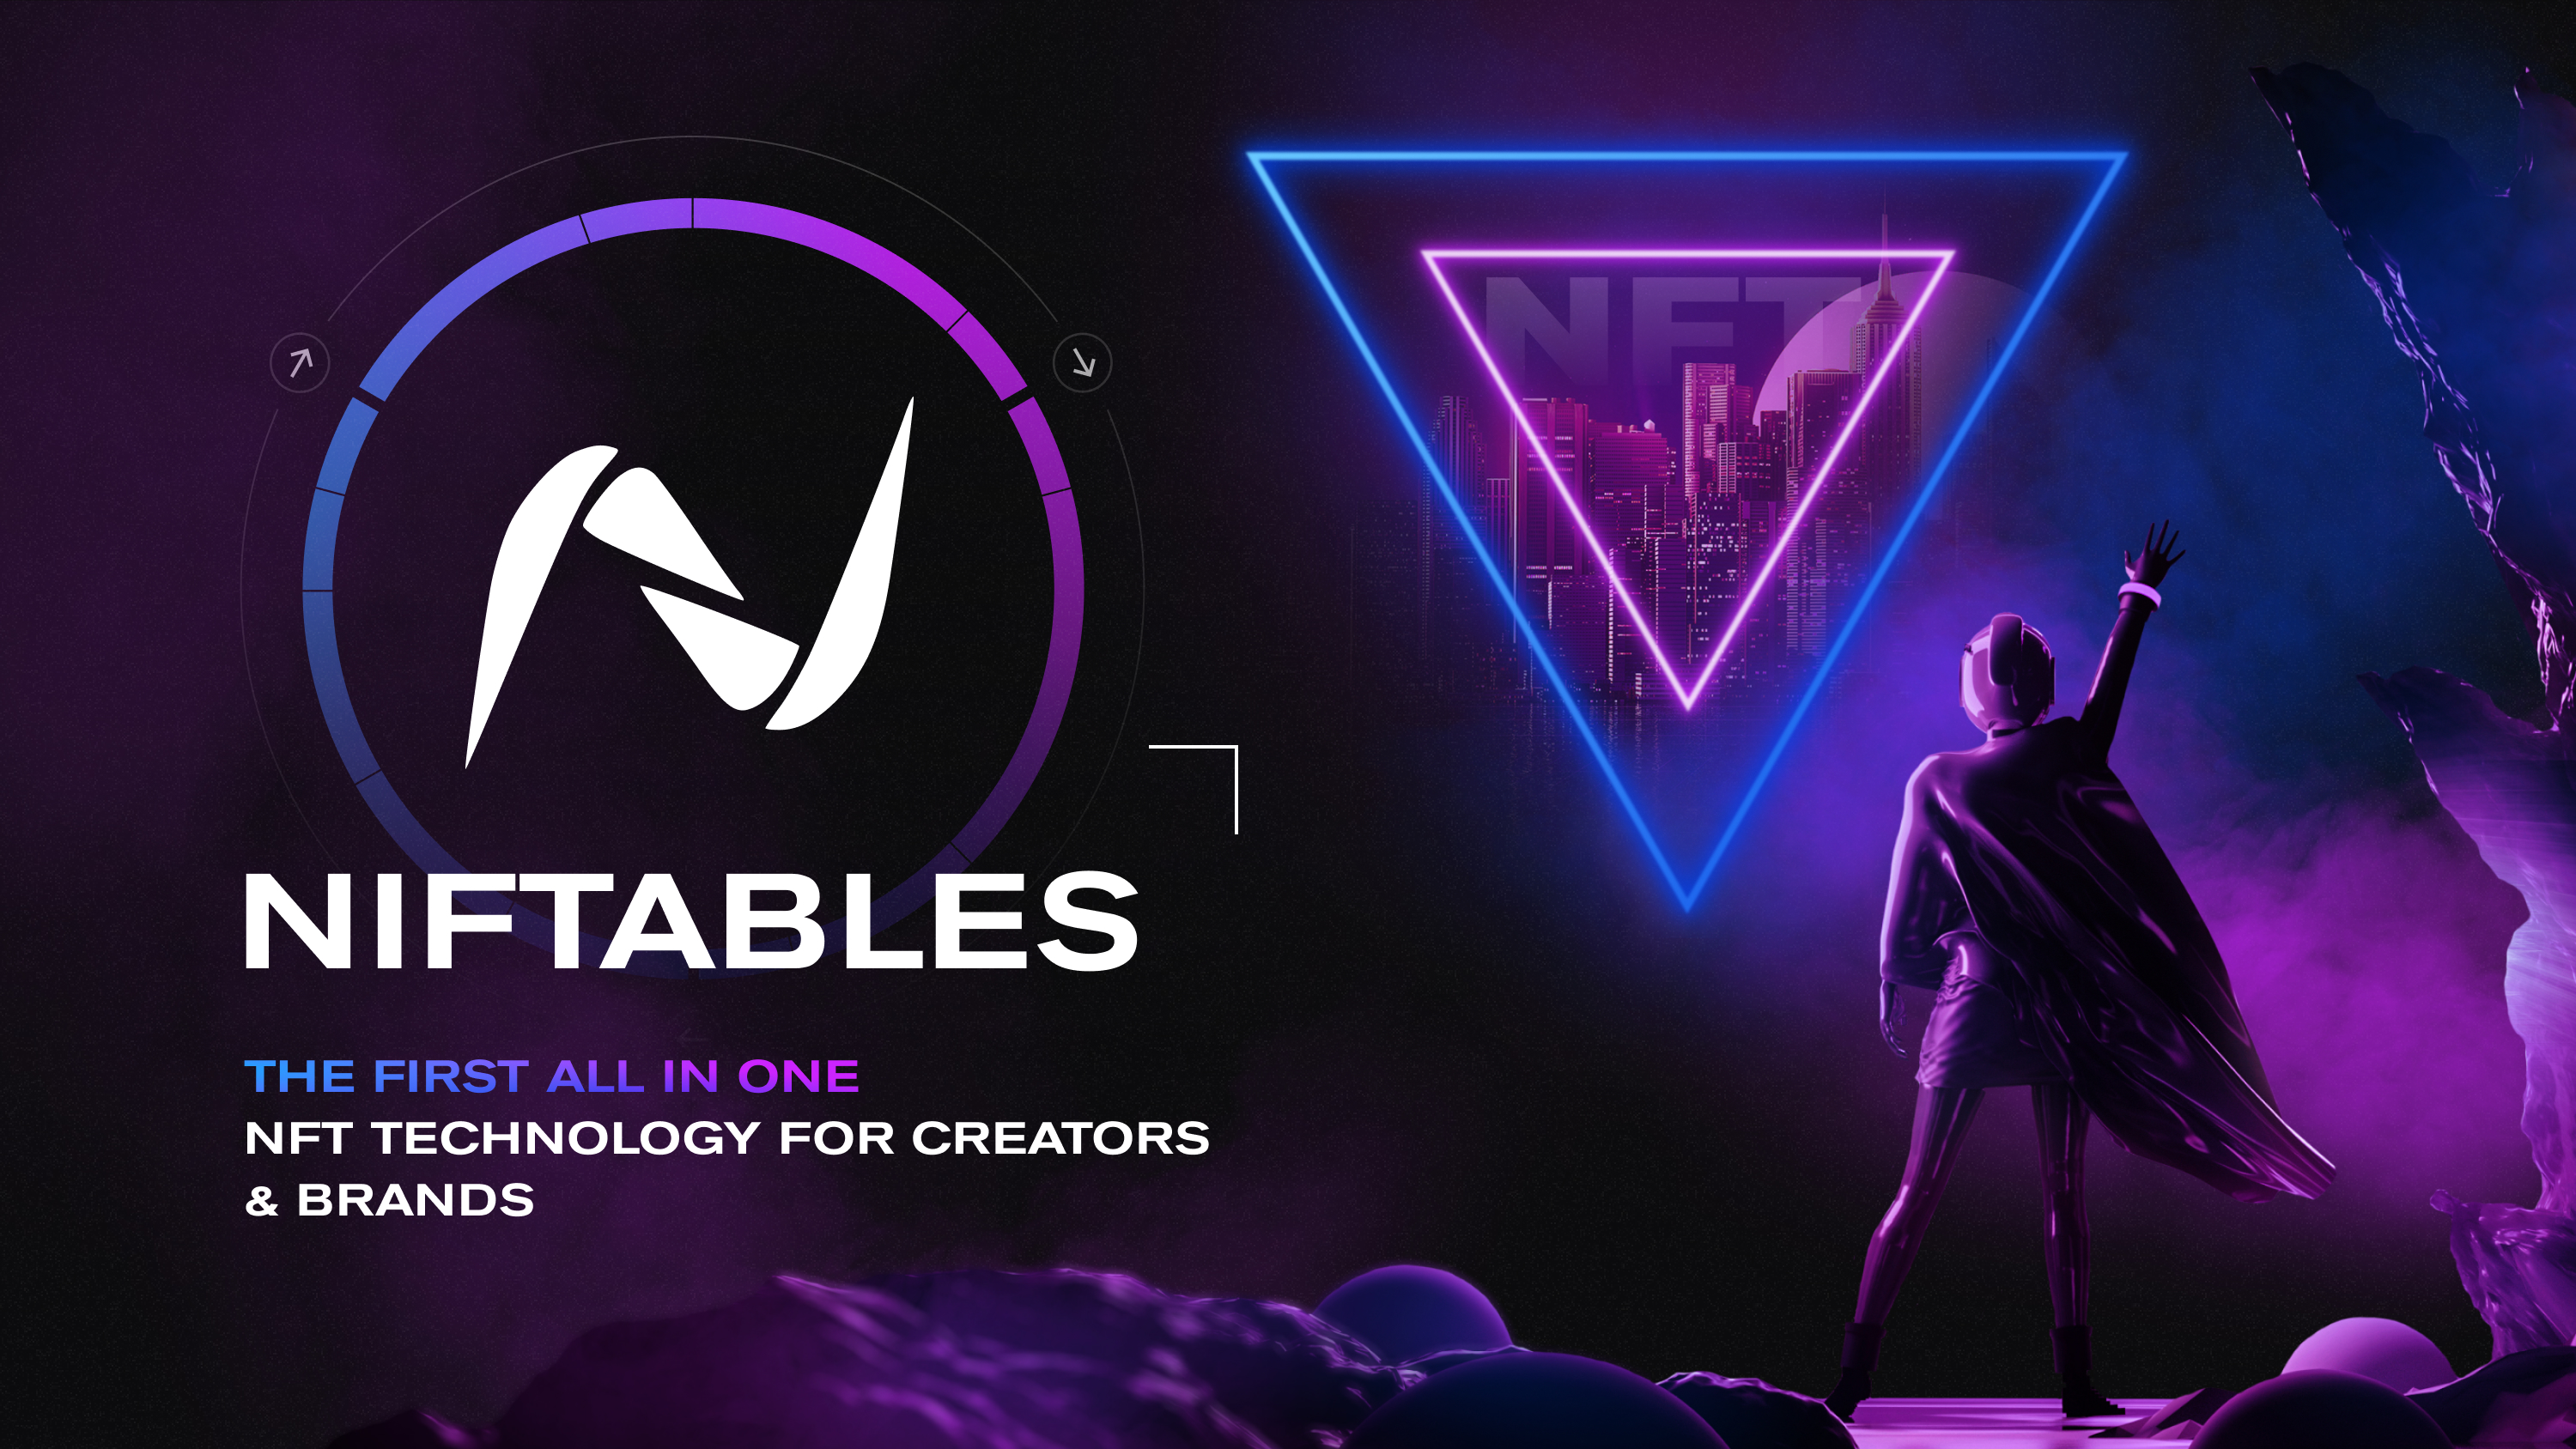 Niftables Introduces Its White-label NFT Platform Solution For Brands And Creators Globally